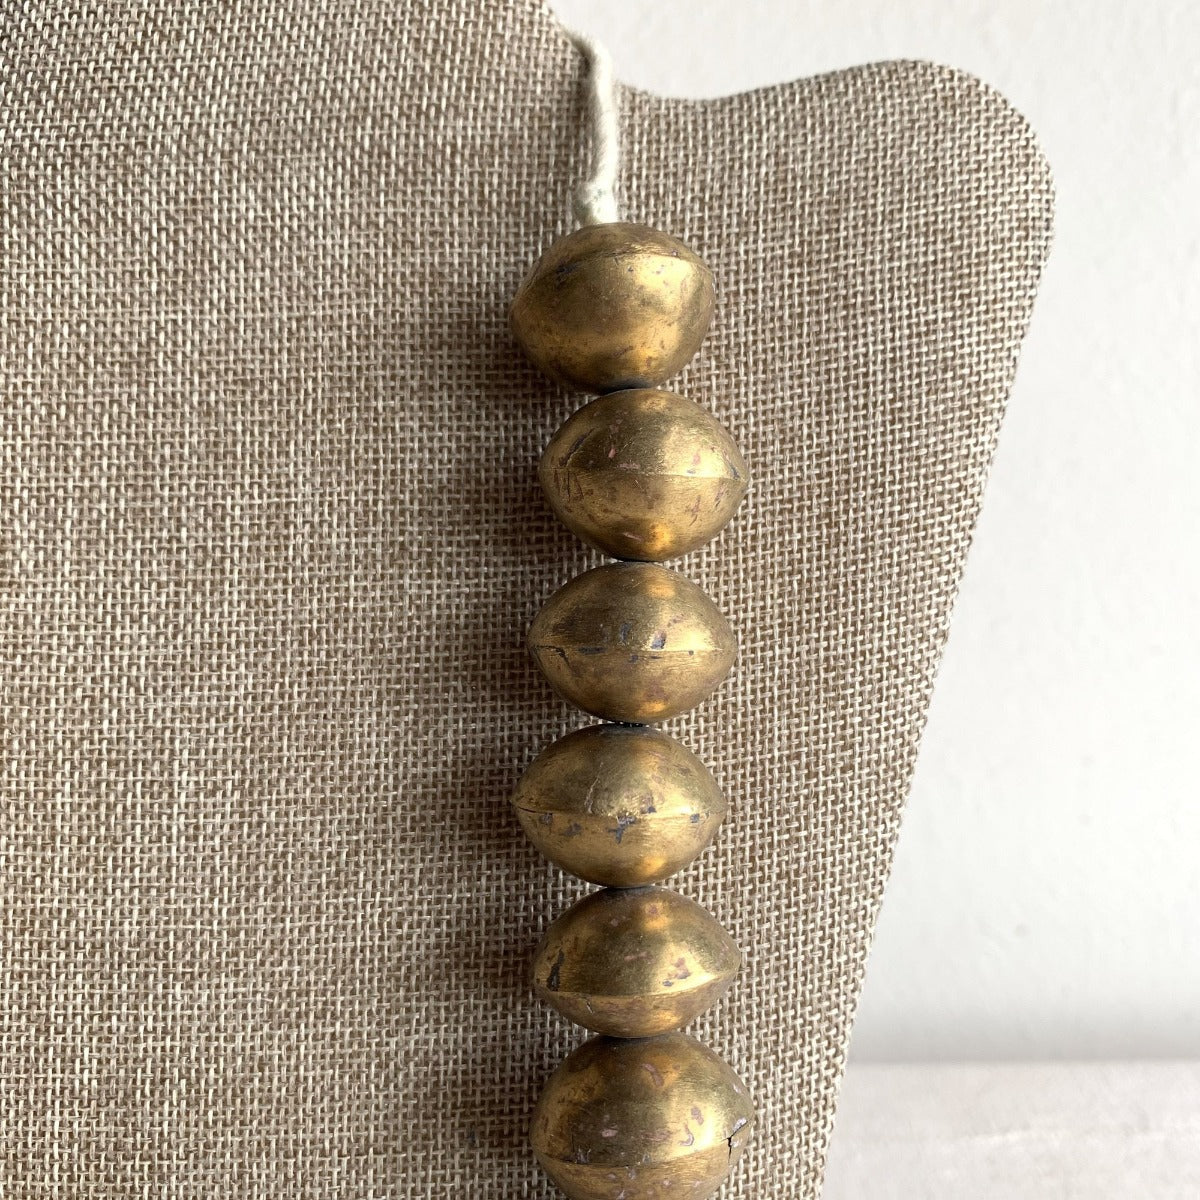 Raw and Plated Brass Beads